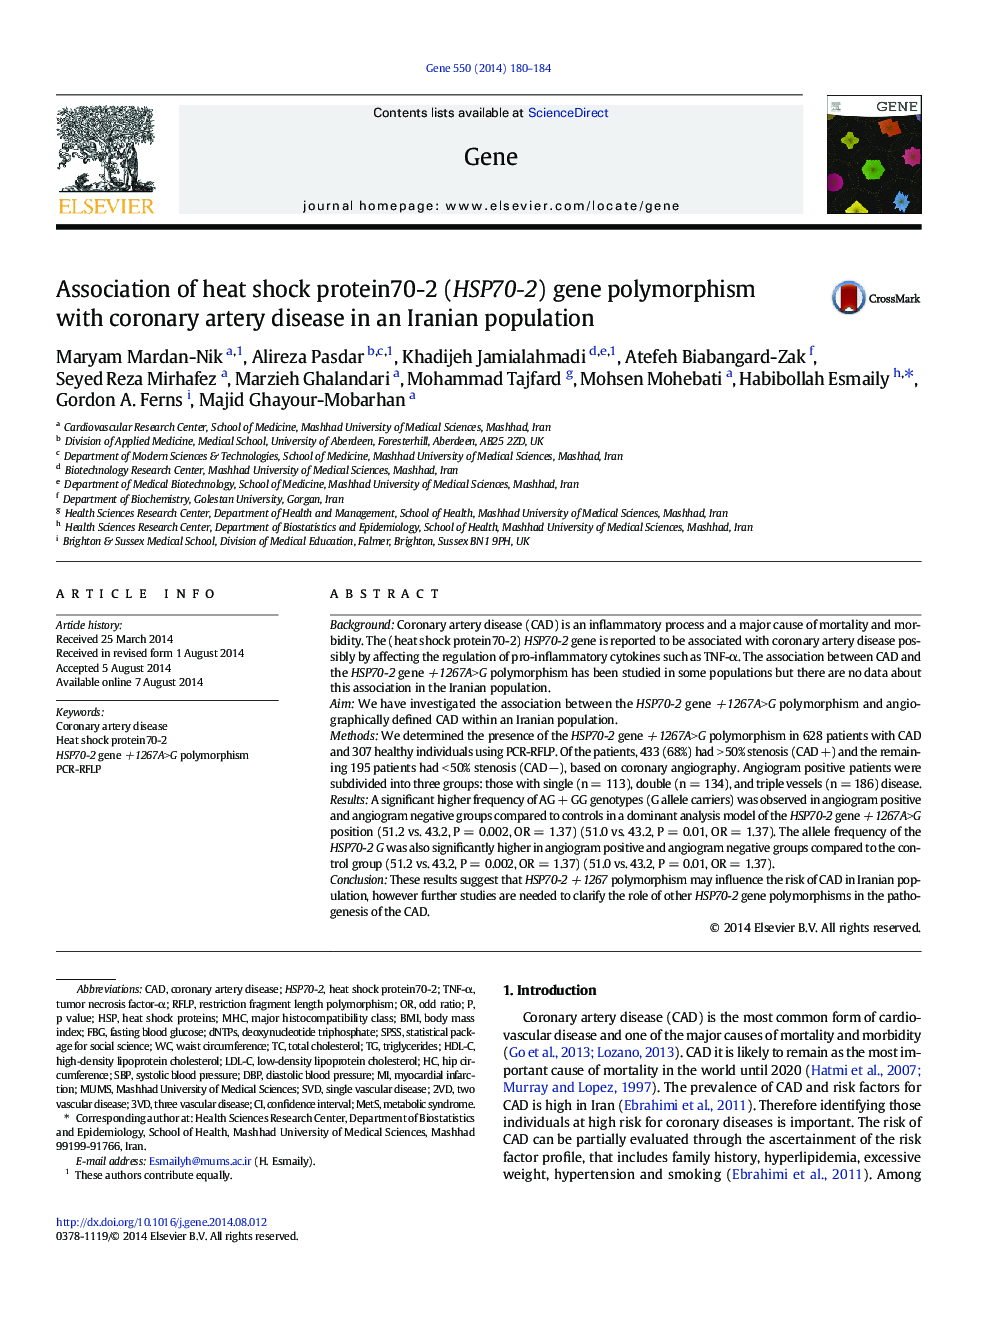 Association of heat shock protein70-2 (HSP70-2) gene polymorphism with coronary artery disease in an Iranian population